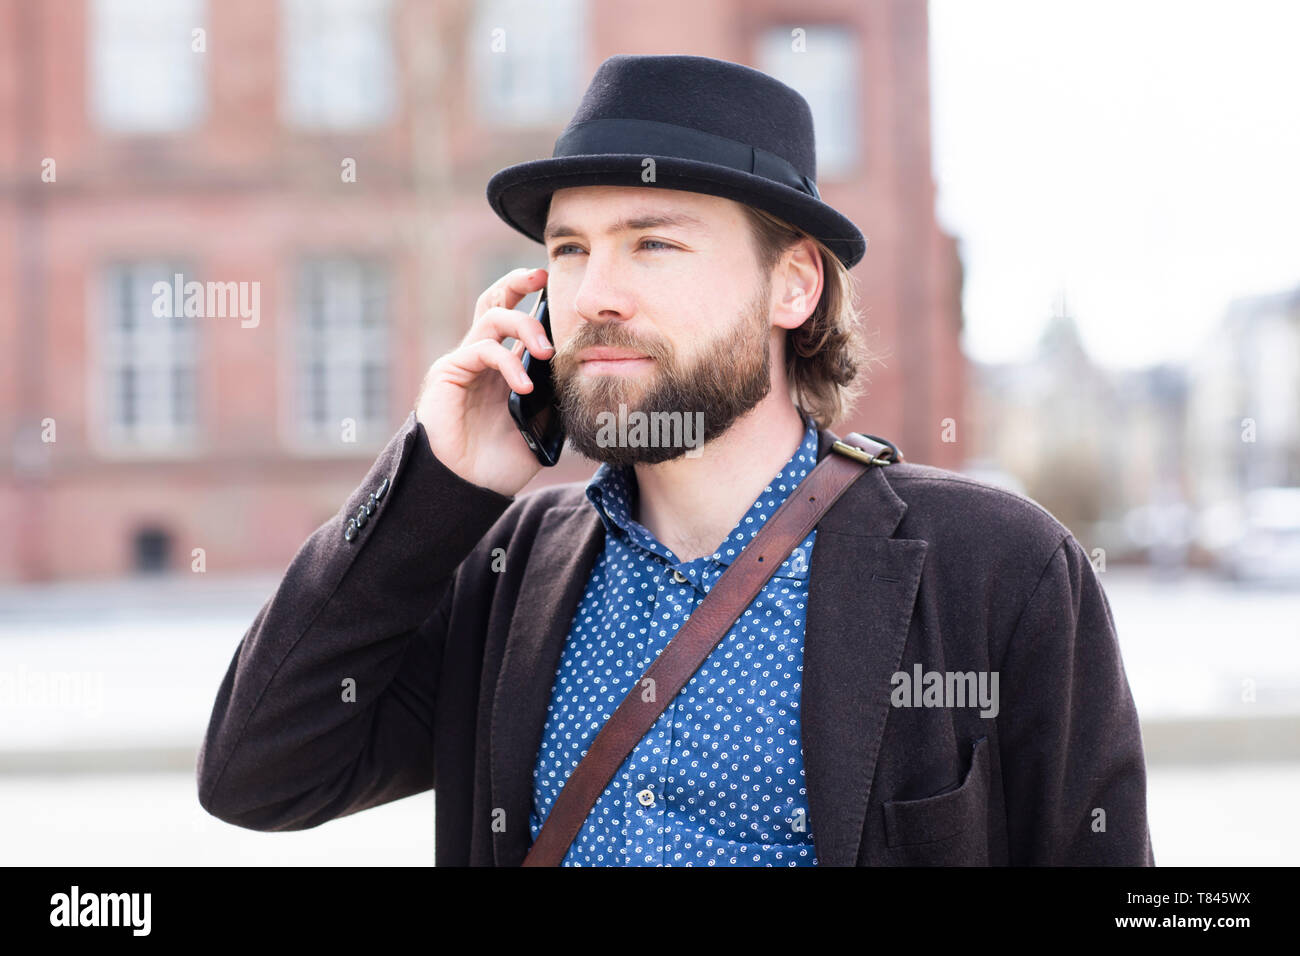 Man in trilby making smartphone call on city street Stock Photo